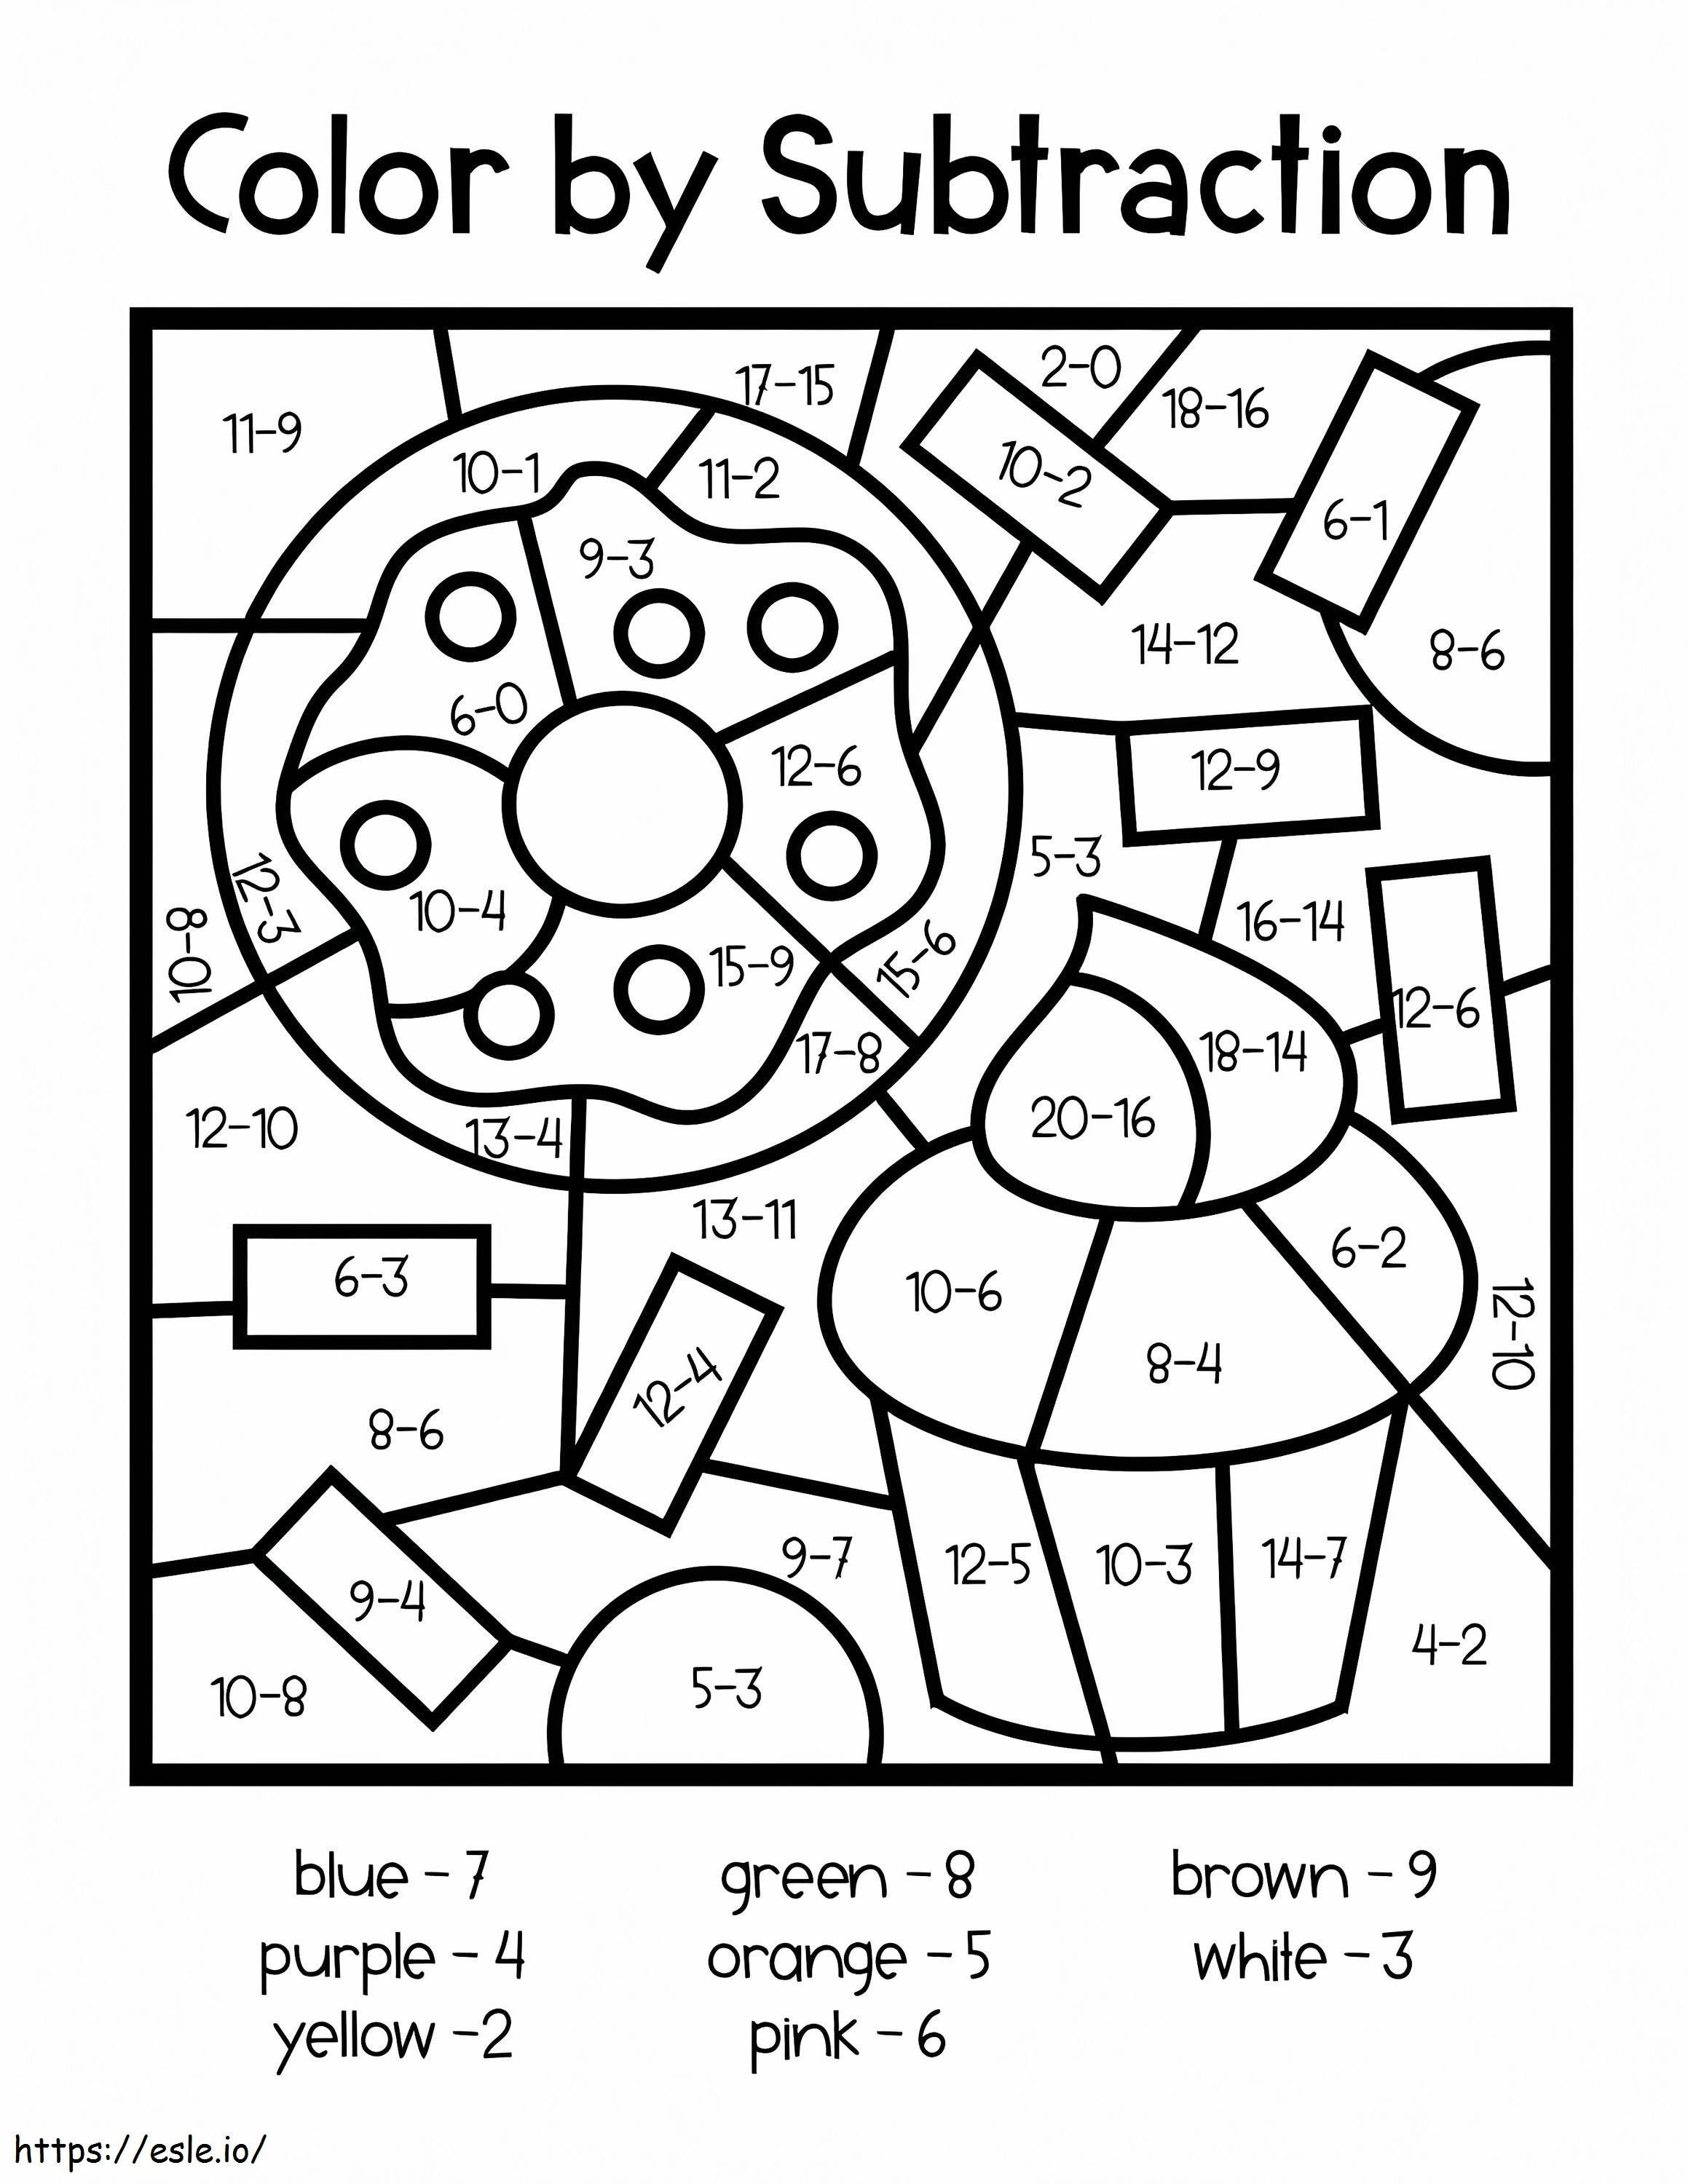 Subtraction Color By Number Worksheet coloring page